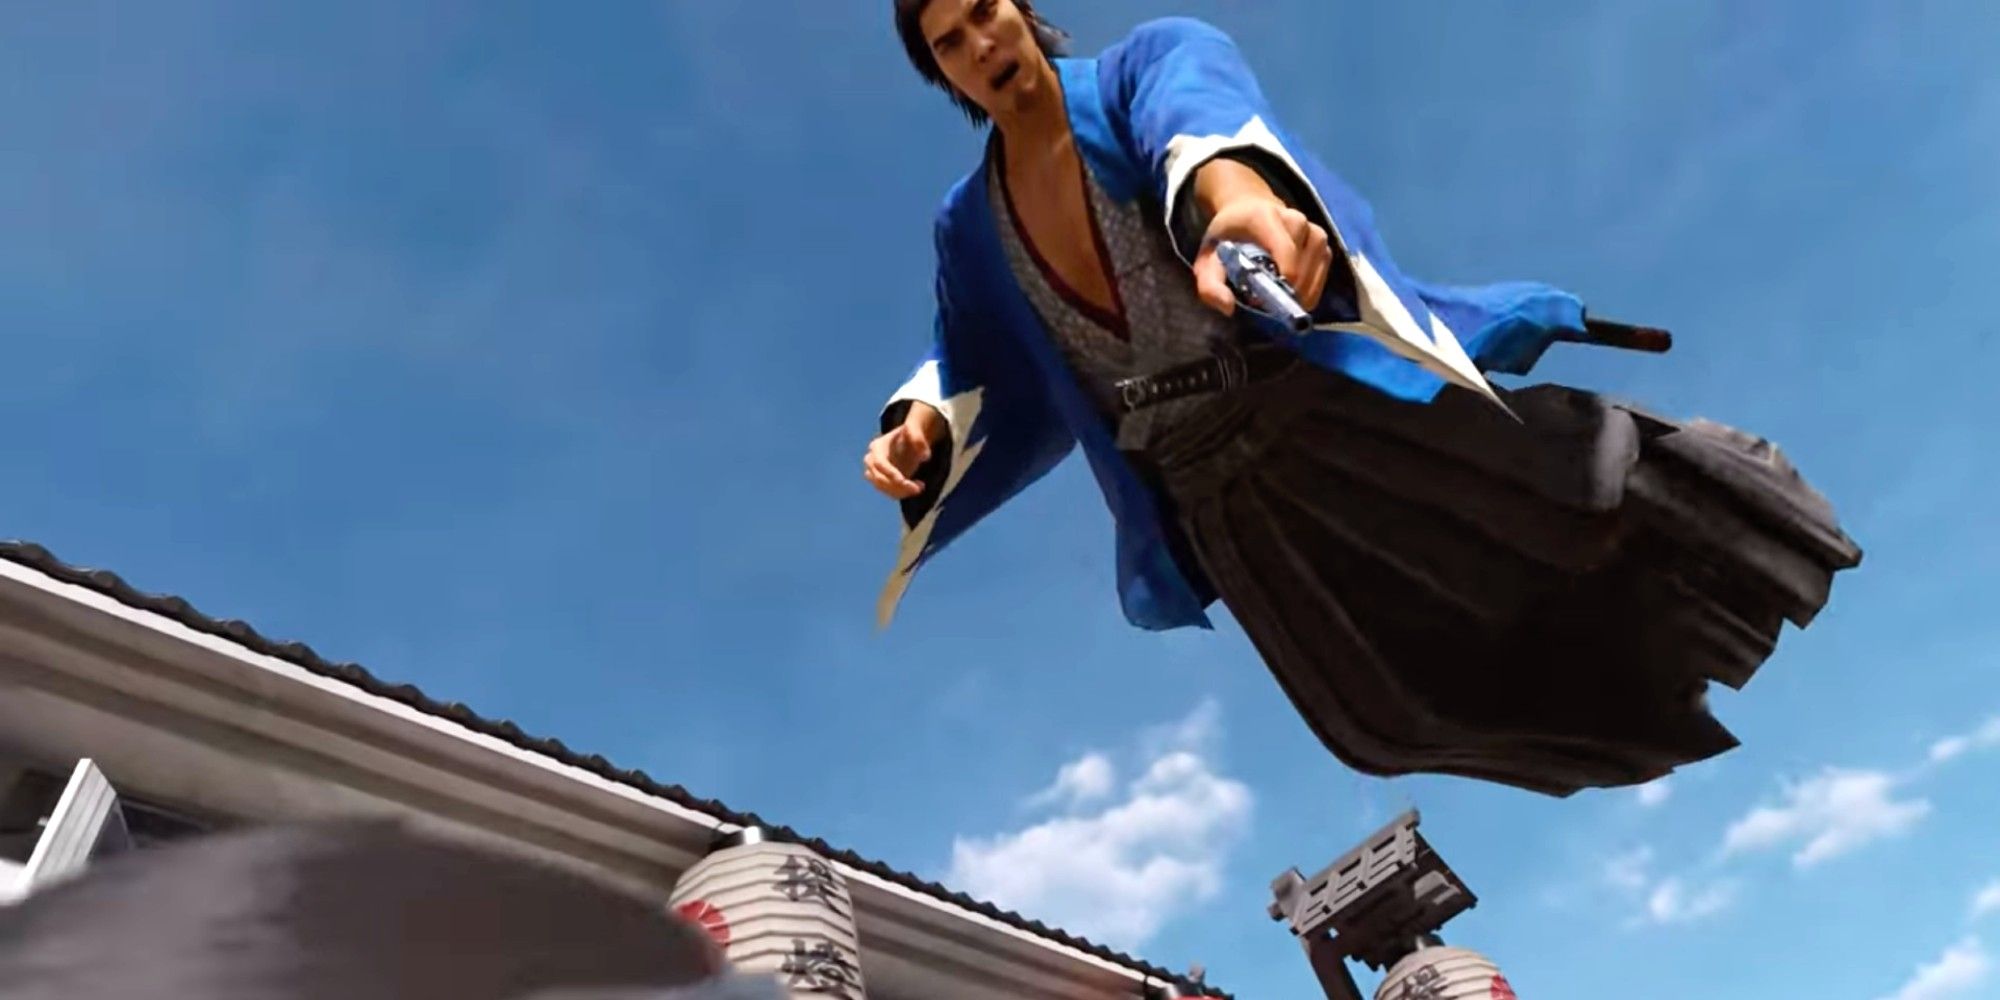 Ryoma leaps into the air and aims down his gun below